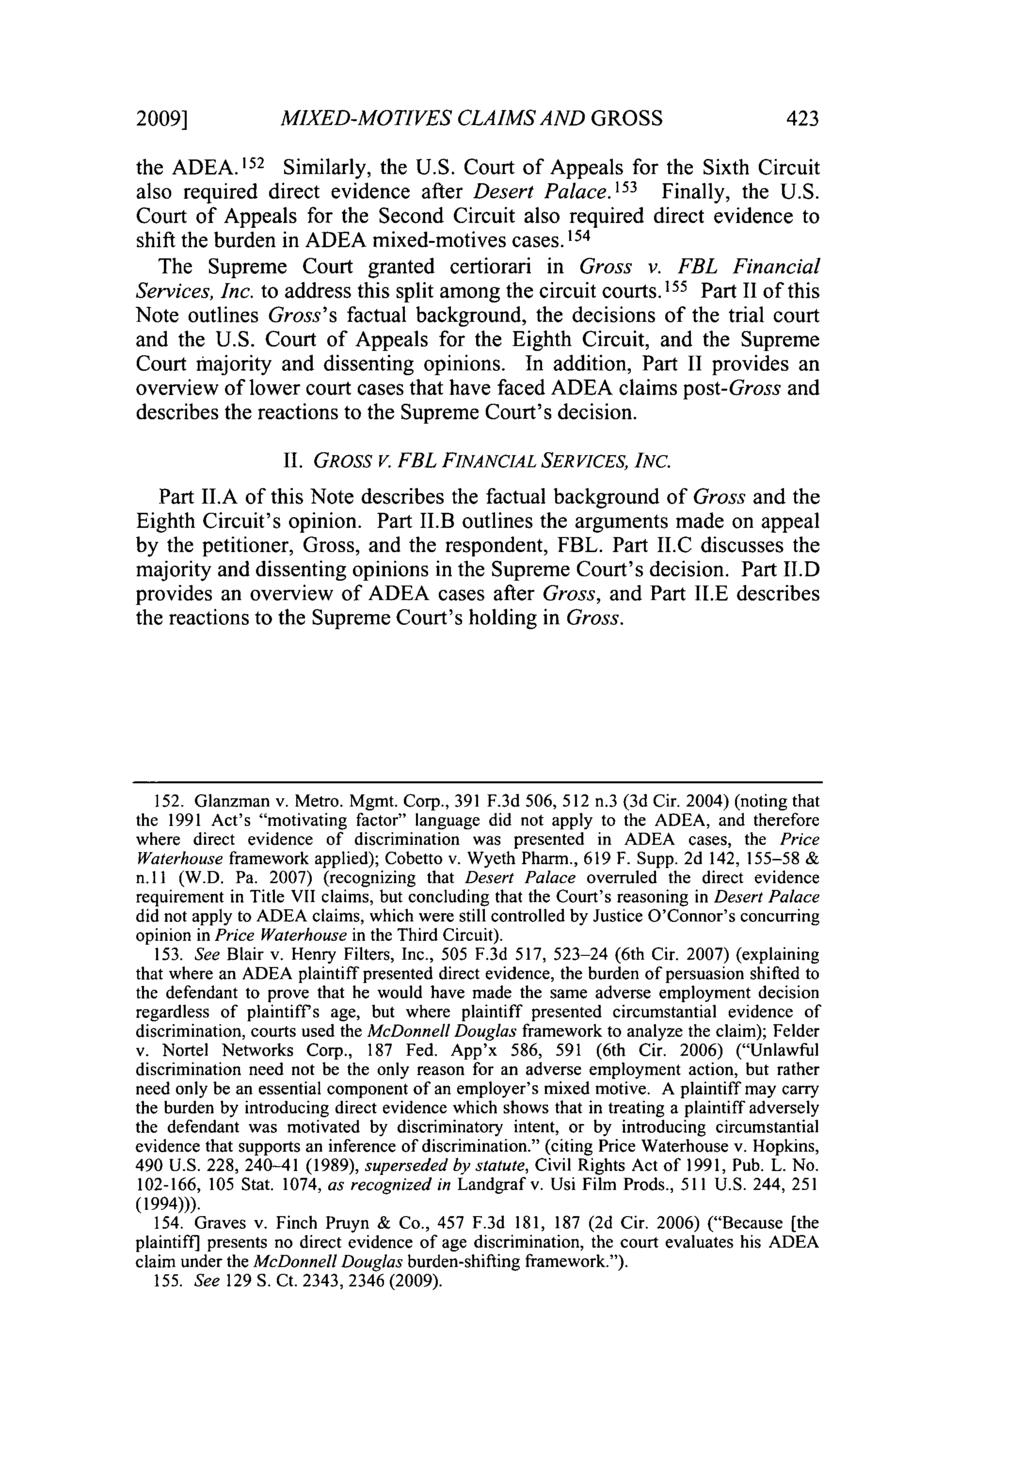 2009] MIXED-MOTIVES CLAIMS AND GROSS the ADEA. 1 52 Similarly, the U.S. Court of Appeals for the Sixth Circuit also required direct evidence after Desert Palace. 153 Finally, the U.S. Court of Appeals for the Second Circuit also required direct evidence to shift the burden in ADEA mixed-motives cases.